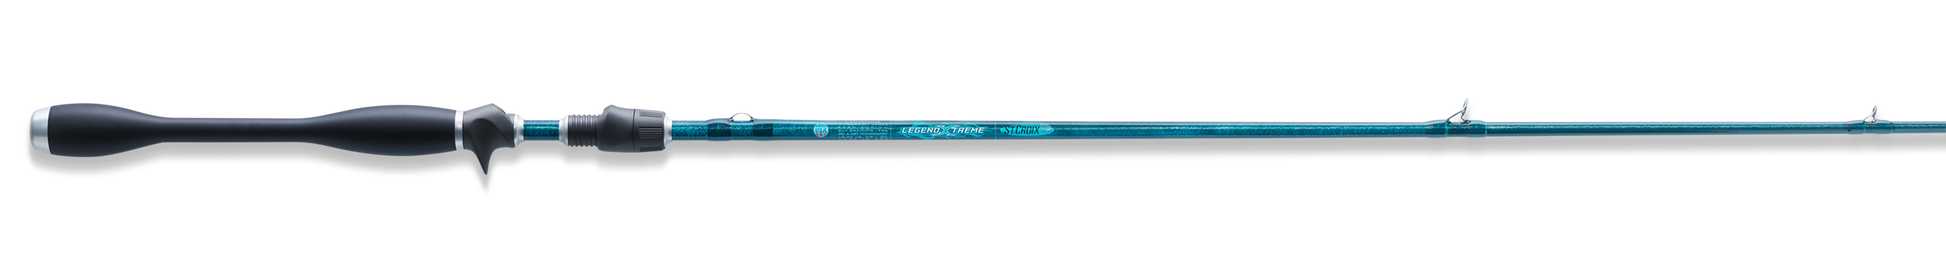 St. Croix Legend Xtreme Casting Rods - Dogfish Tackle & Marine